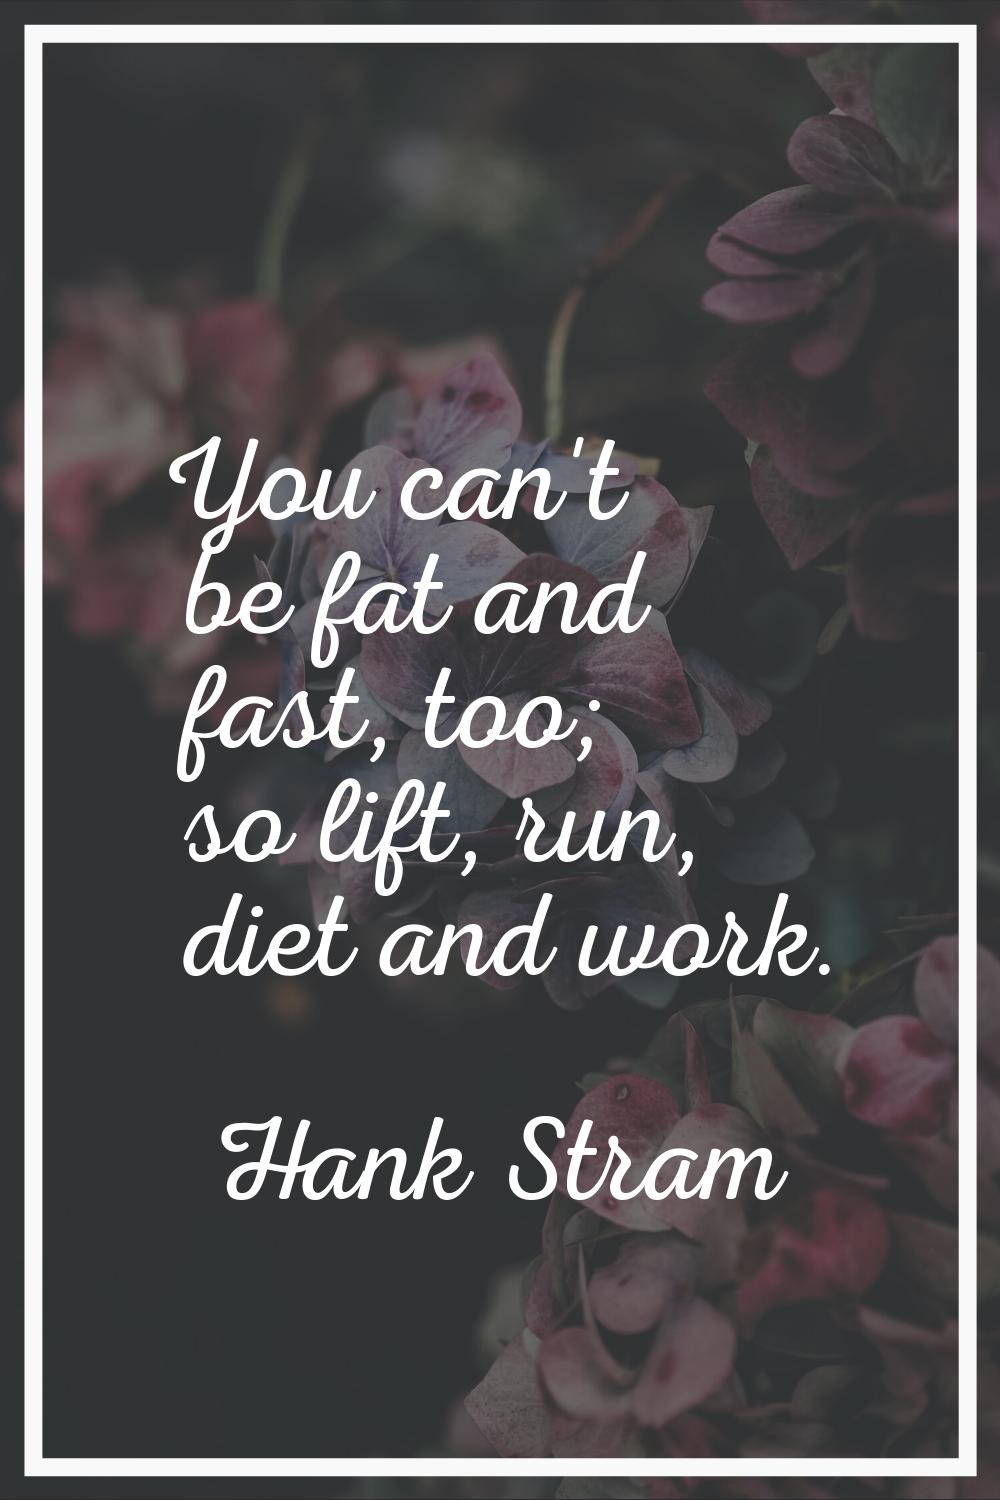 You can't be fat and fast, too; so lift, run, diet and work.